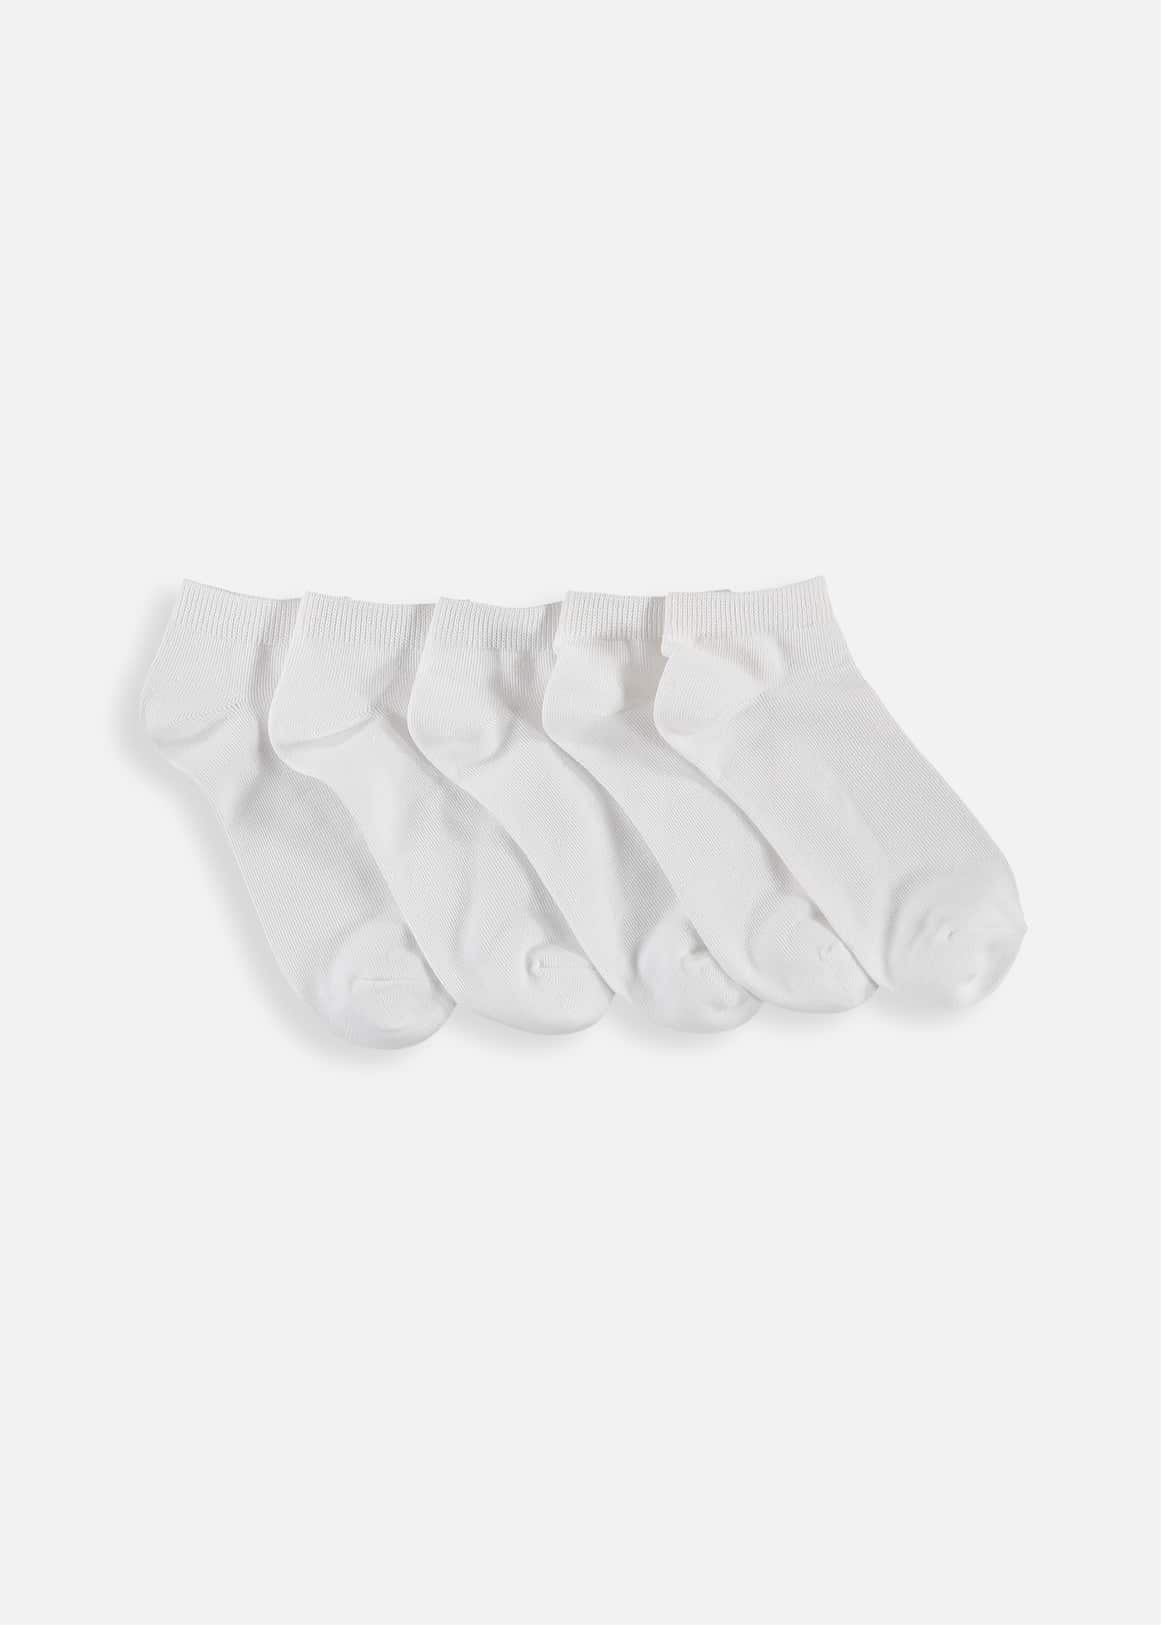 5PK PLAIN LINERS - Woolworths Mauritius Online